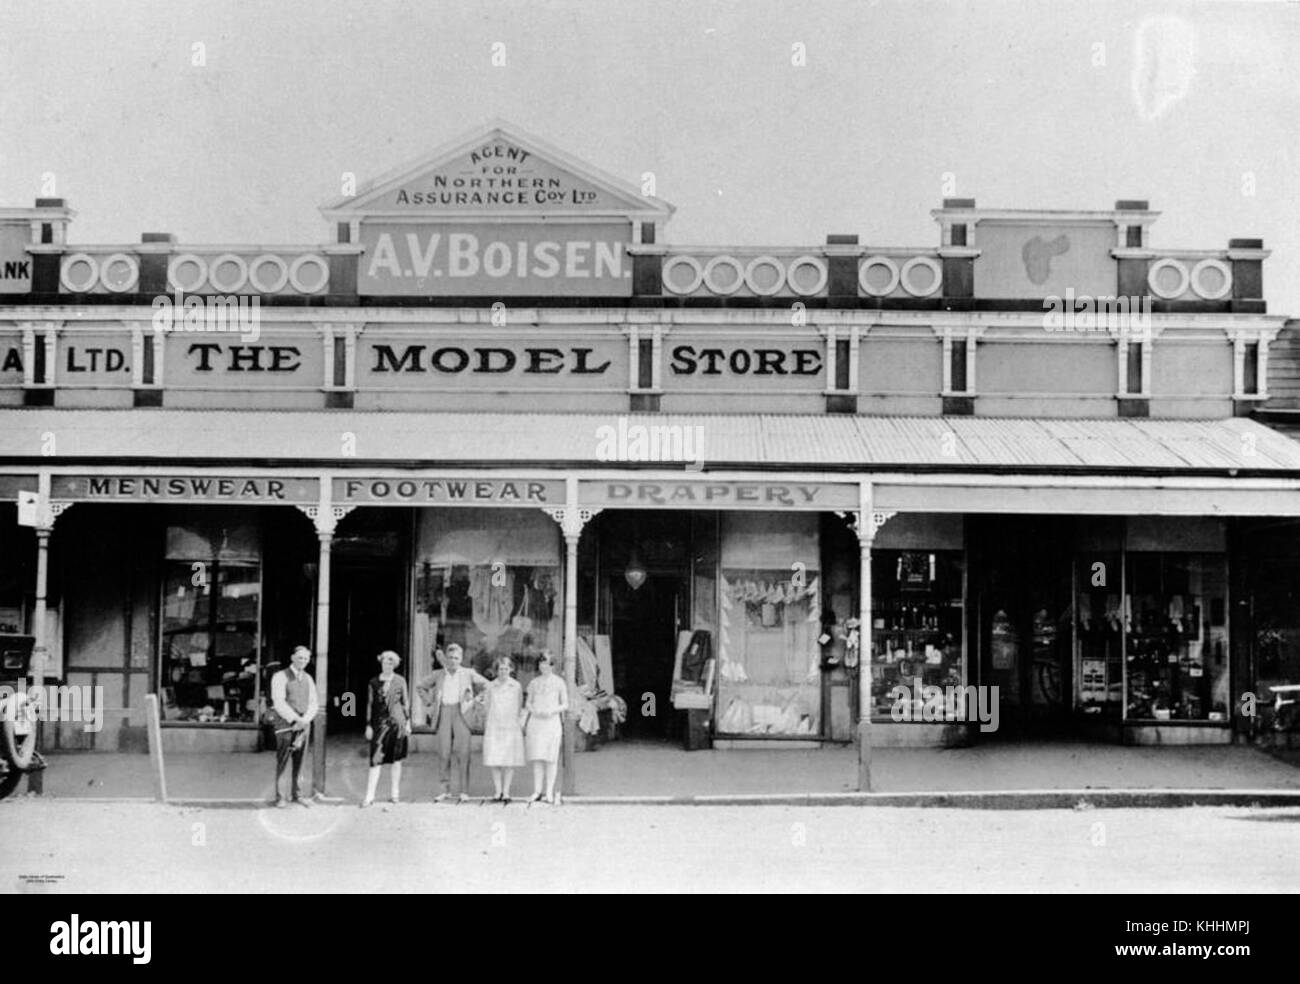 1 180755 Staff posing in front of A. V. Boisen's store at Wondai, 1927 Stock Photo